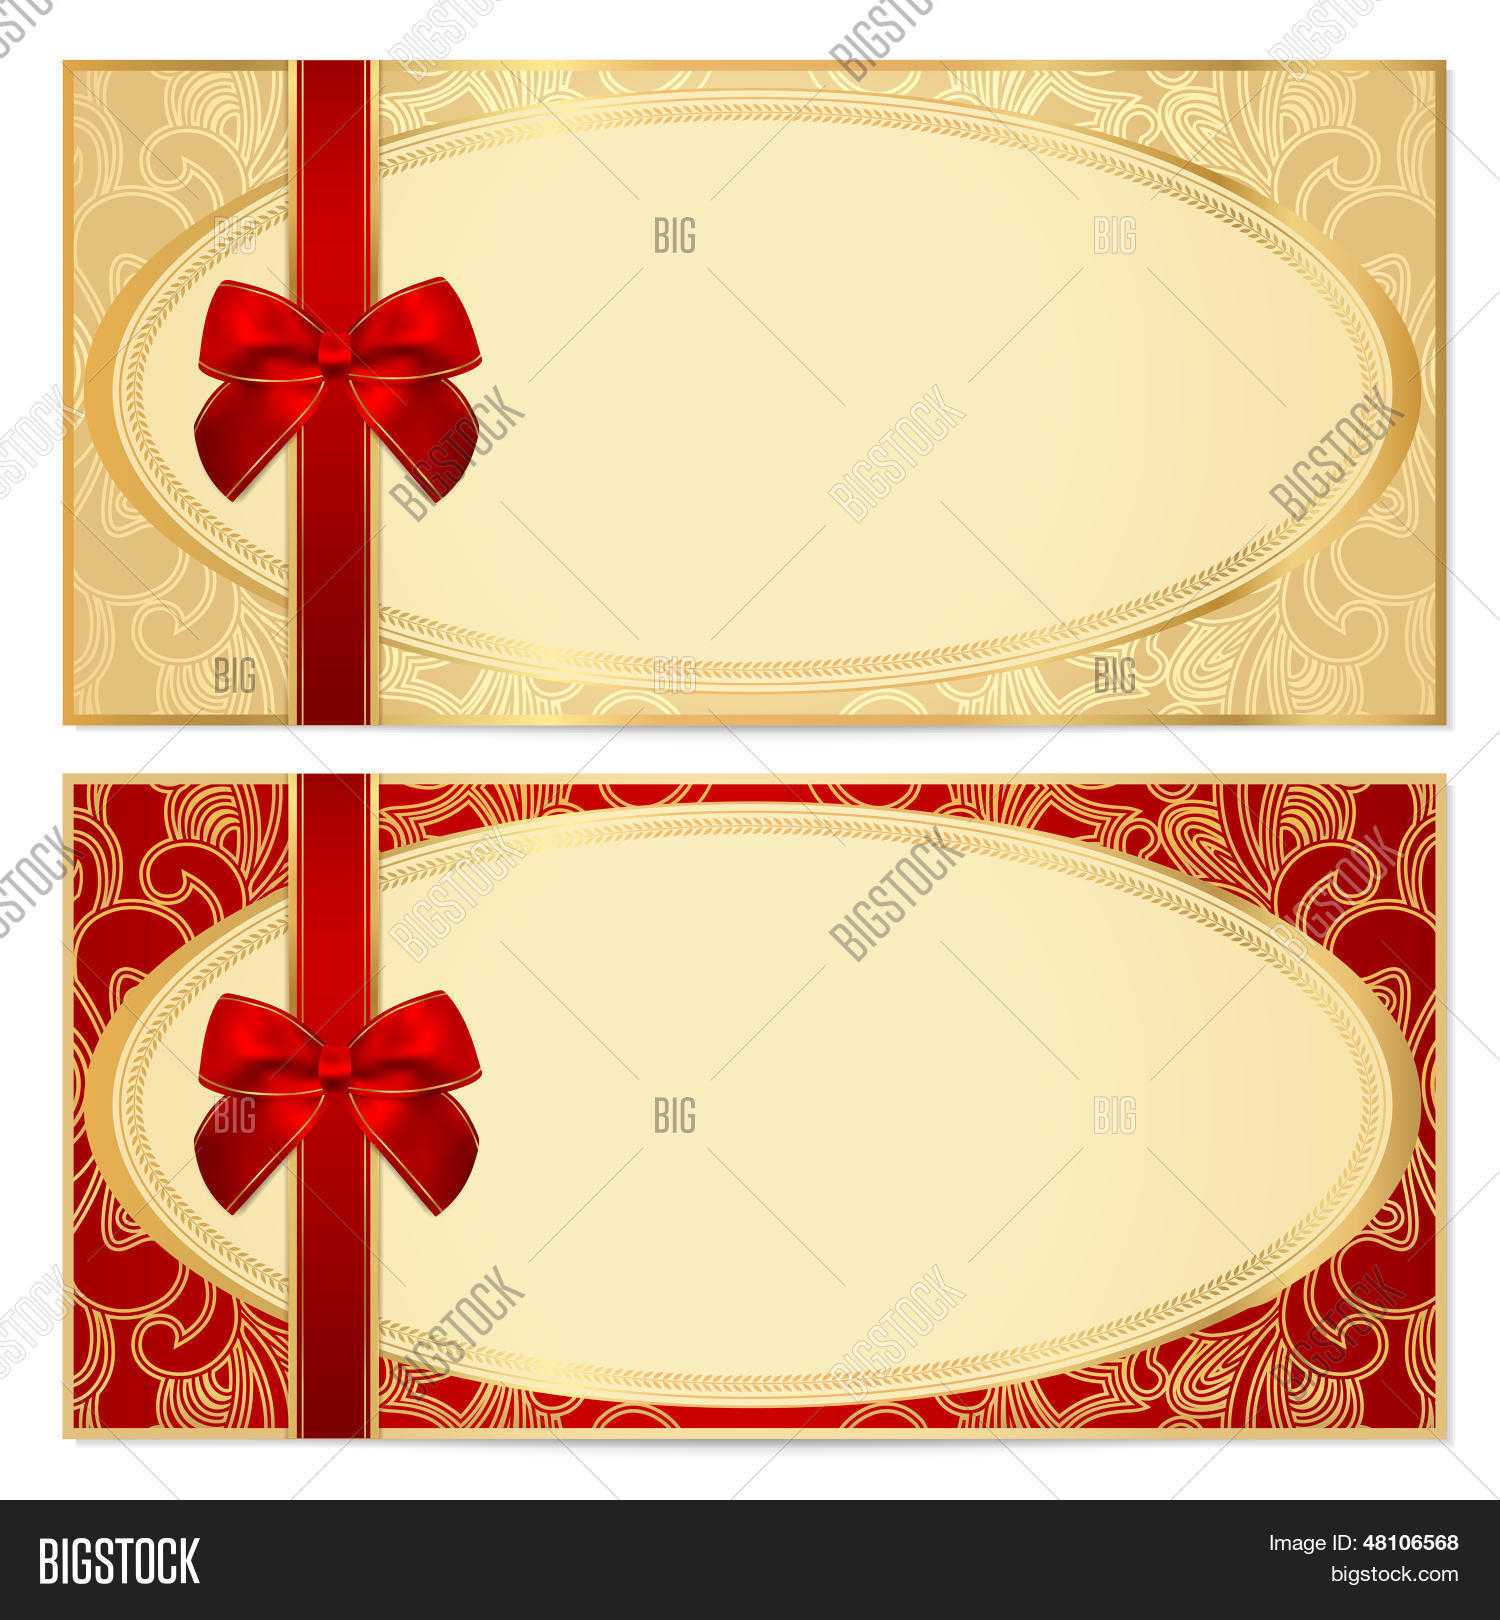 Voucher/ Gift Vector & Photo (Free Trial) | Bigstock Pertaining To Scroll Certificate Templates